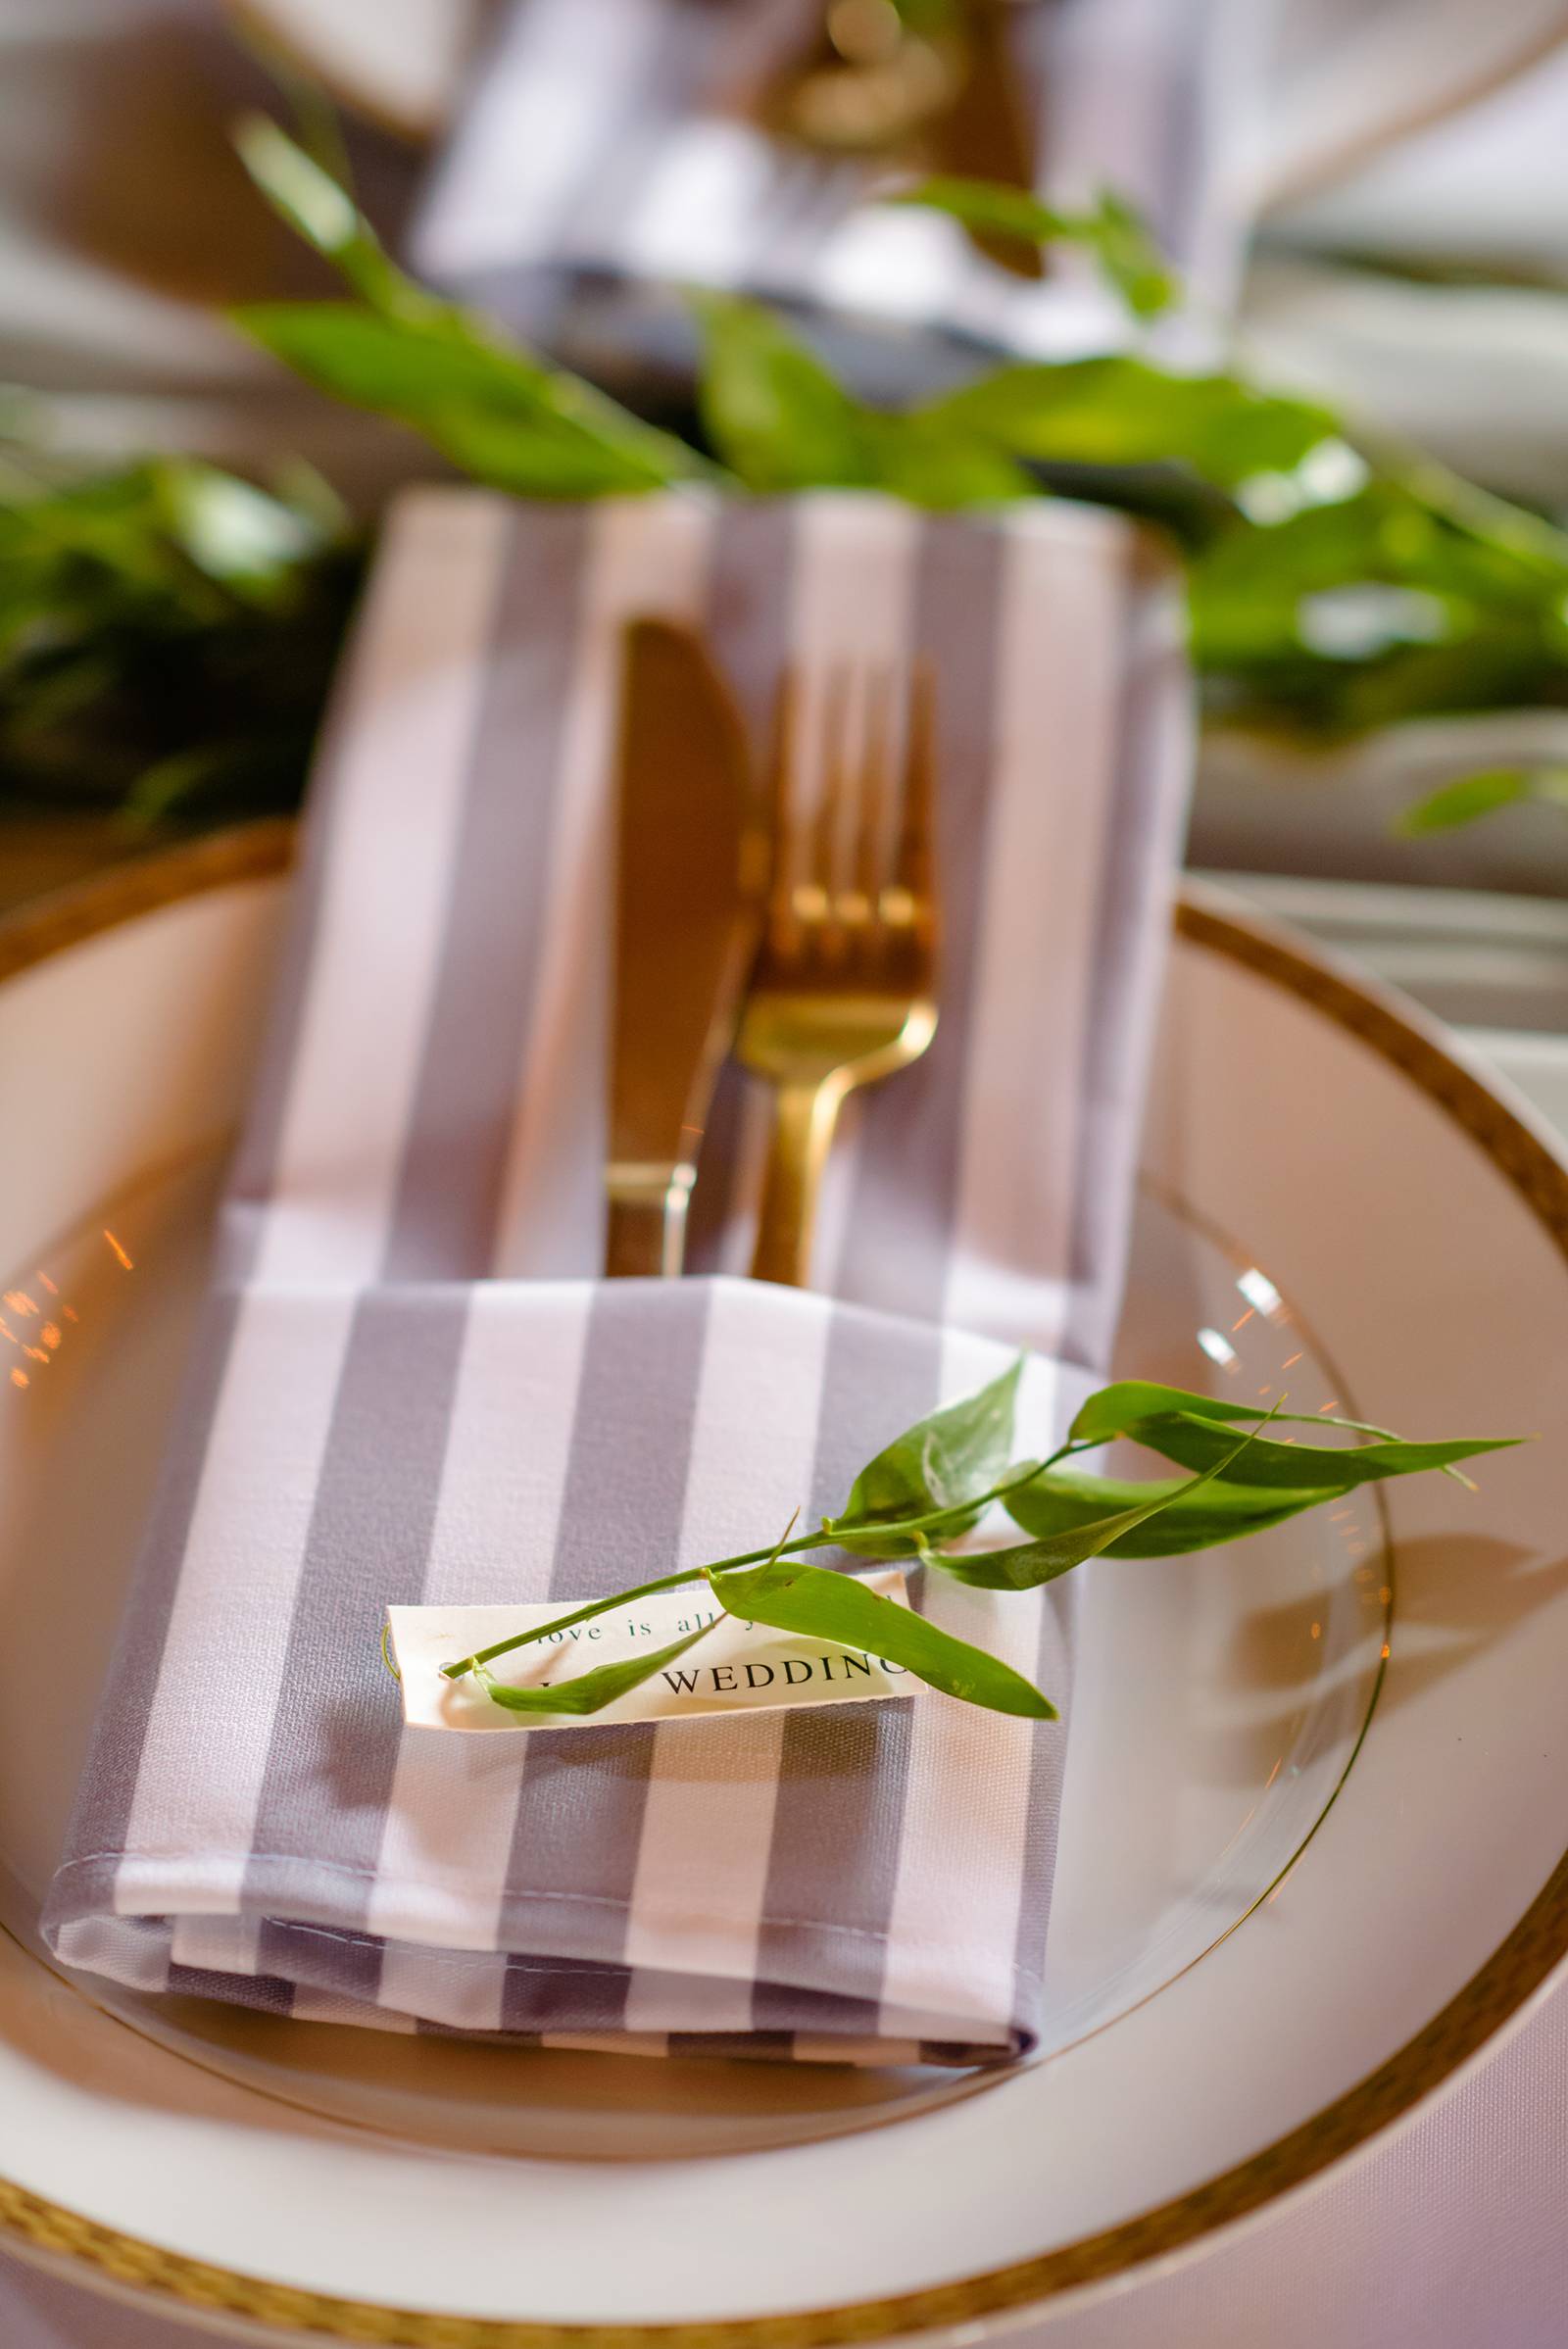 table setting, place setting, grey gray linen napkins, greenery, stripe napkins, place cards, floral